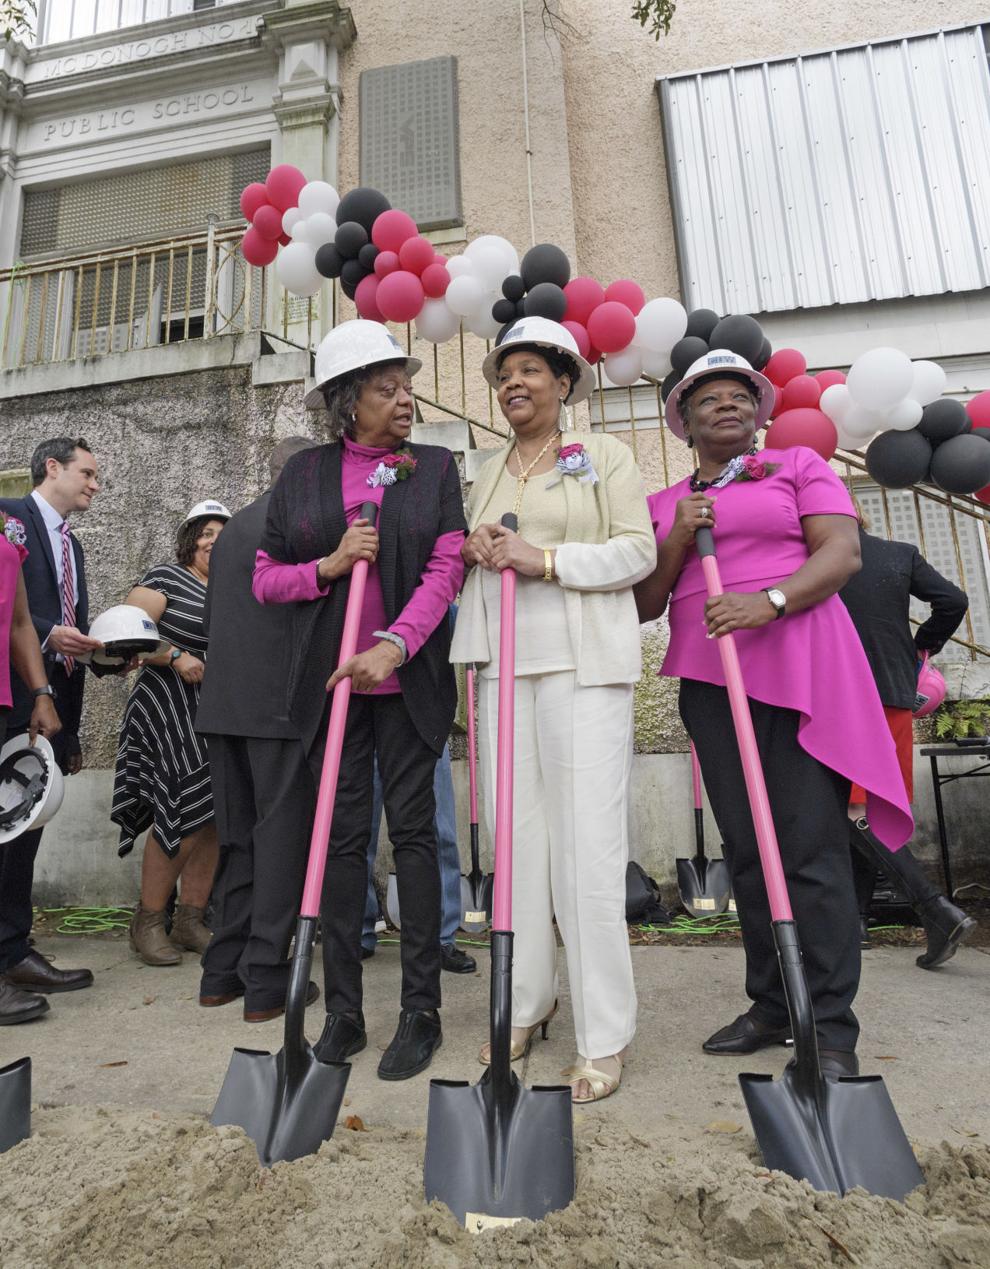 Three Black women, Gail Etienne, Tessie Prevost, and Leona Tate, stand together wearing hard hats and holding shovels with pink handles. Etienne and Tate are wearing hot pink and black, and Prevost is wearing offwhite. They wear hot pink corsages and there are pink, white, and black balloons behind them, tied to the stairway railing of the former McDonogh 19 school that now bears their names. Photo Credit: Nola.com